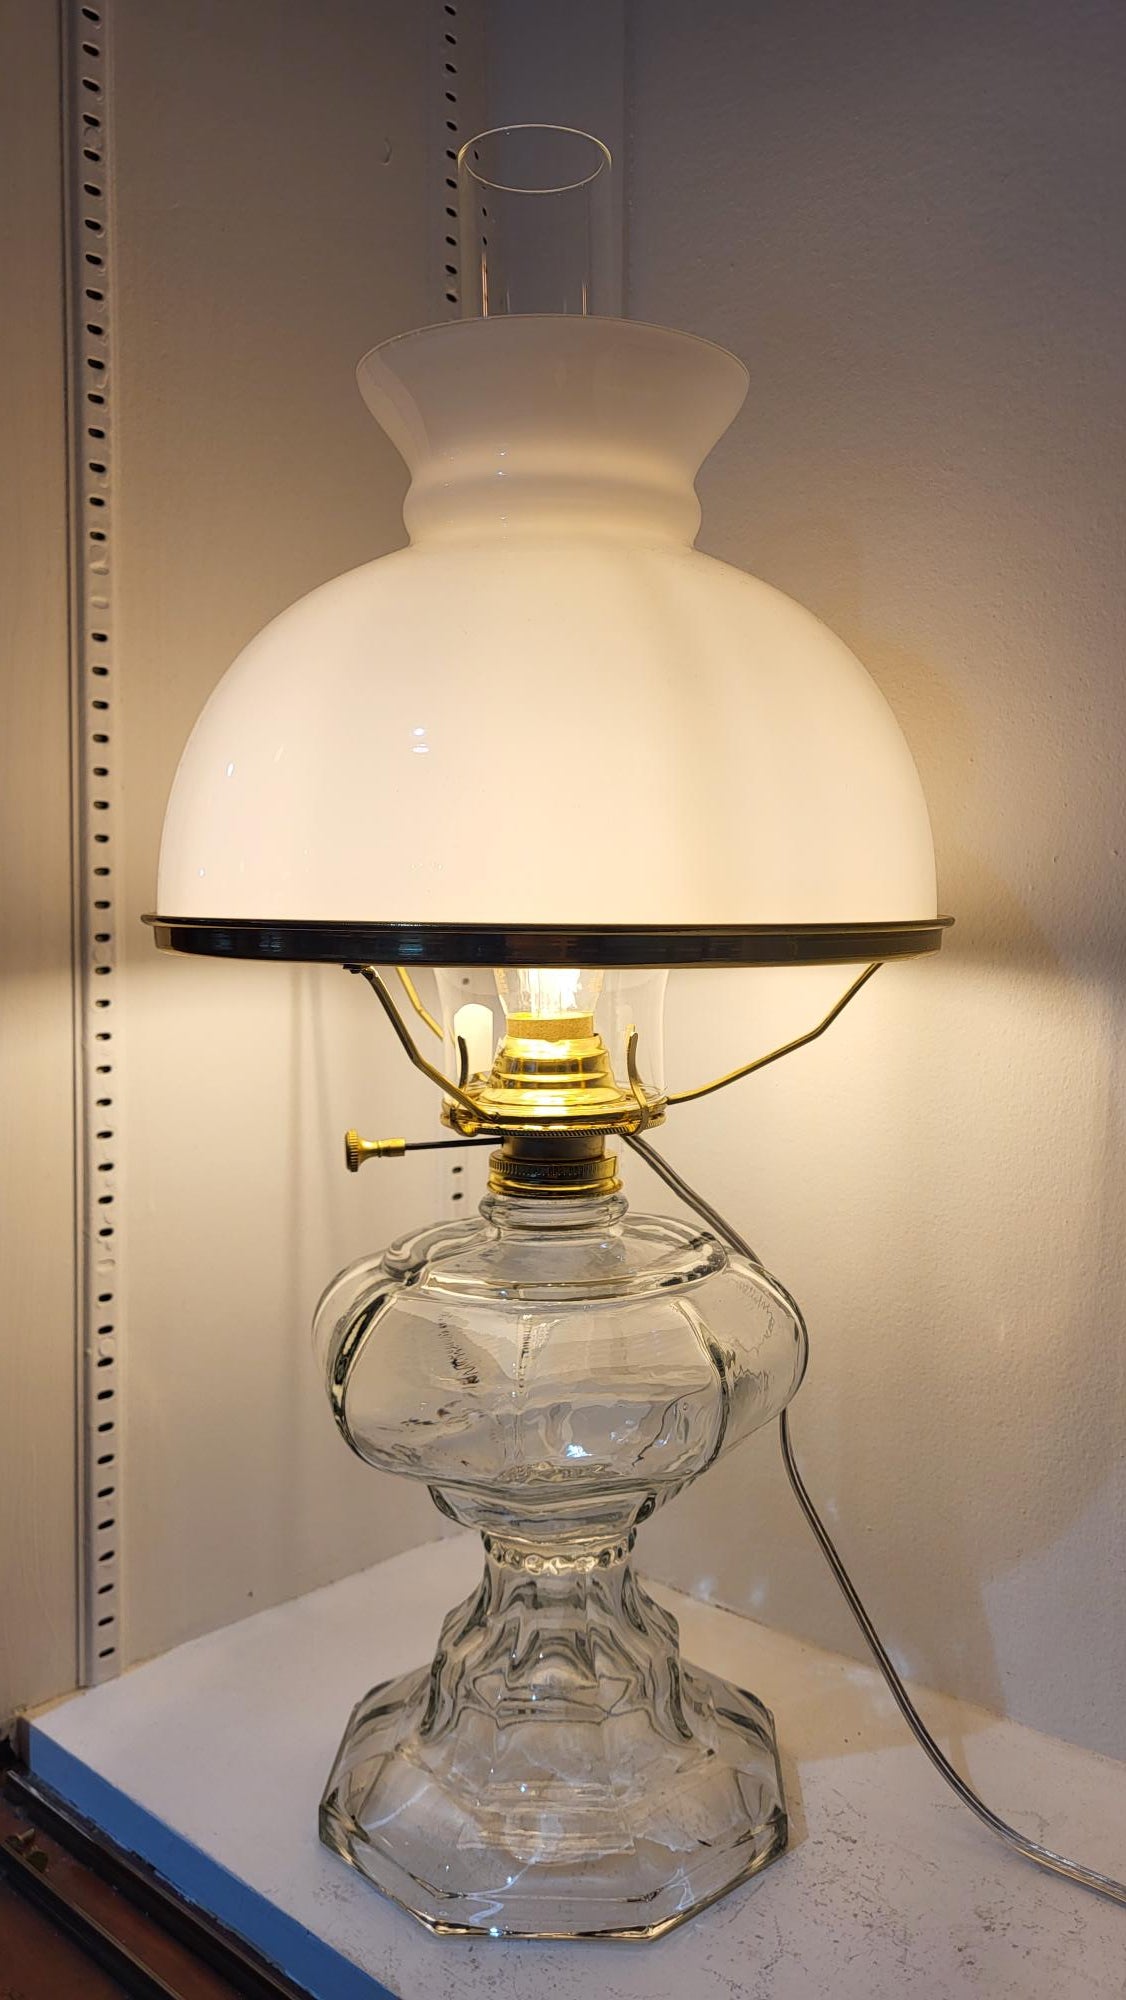 Clear Walling Lamp Complete with Electric Burner and Chimney and Shade (67516)